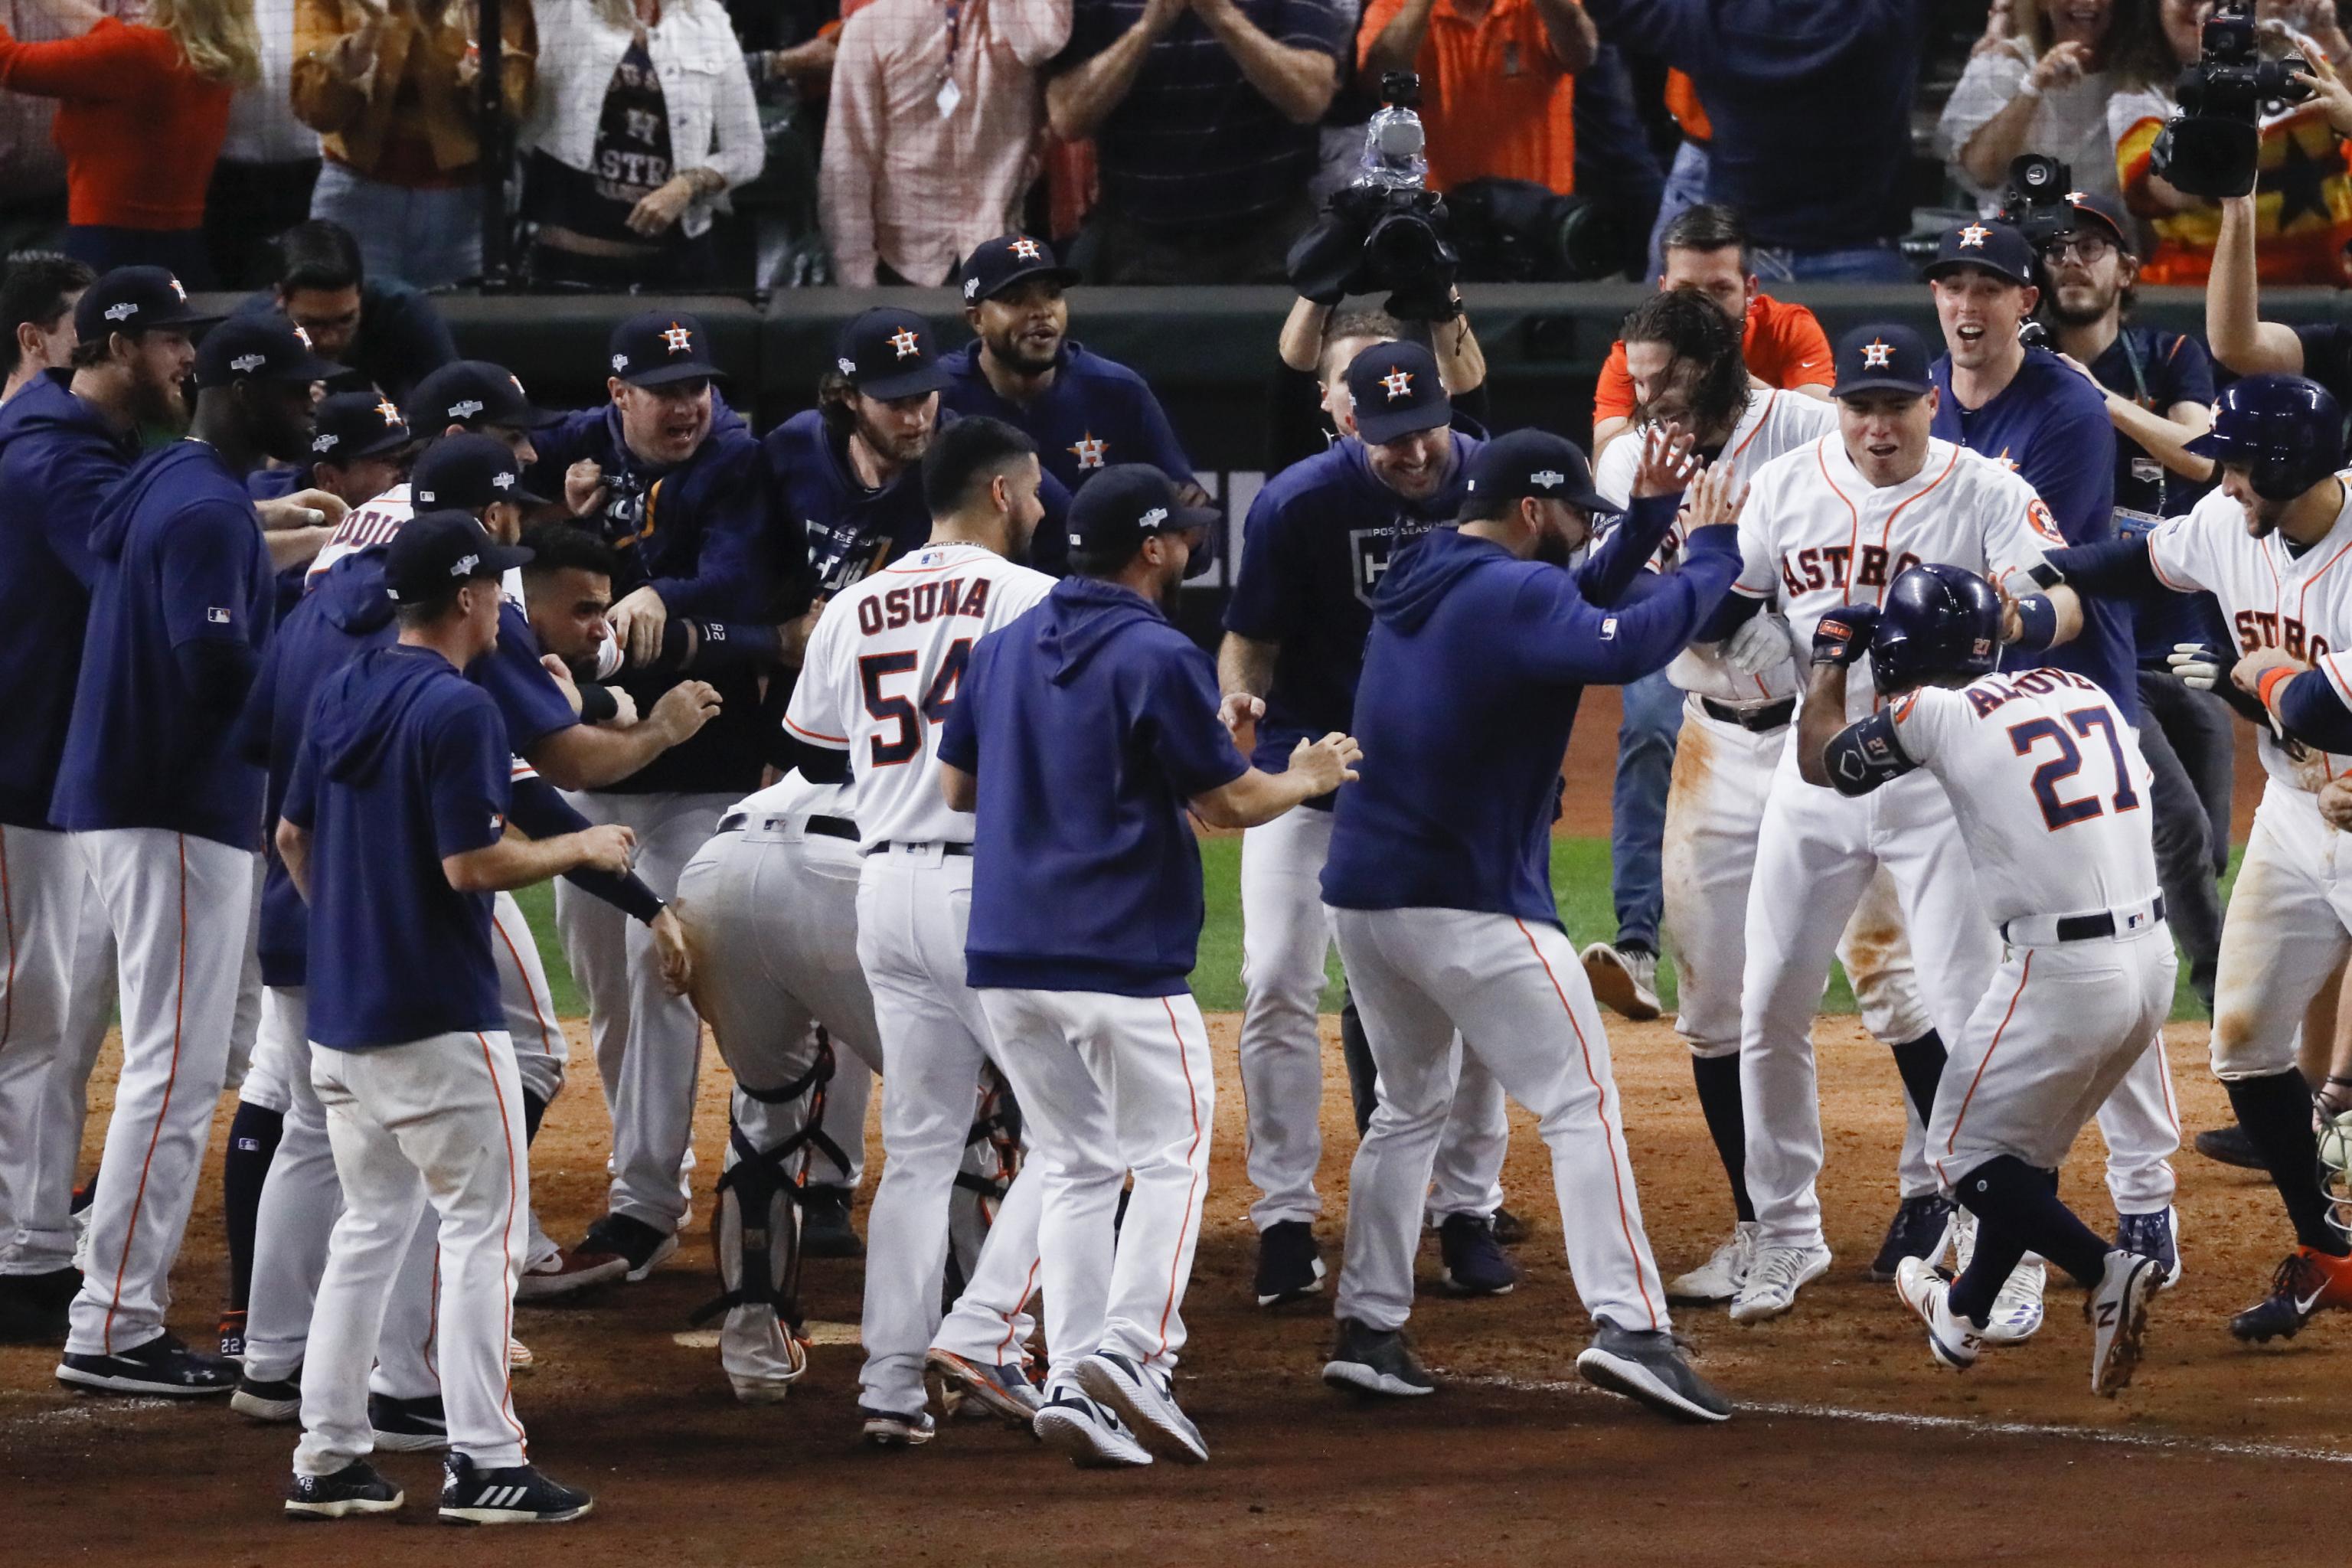 George Springer on his tying home run and the job of the Astros bullpen in  Game 2 win of ALCS